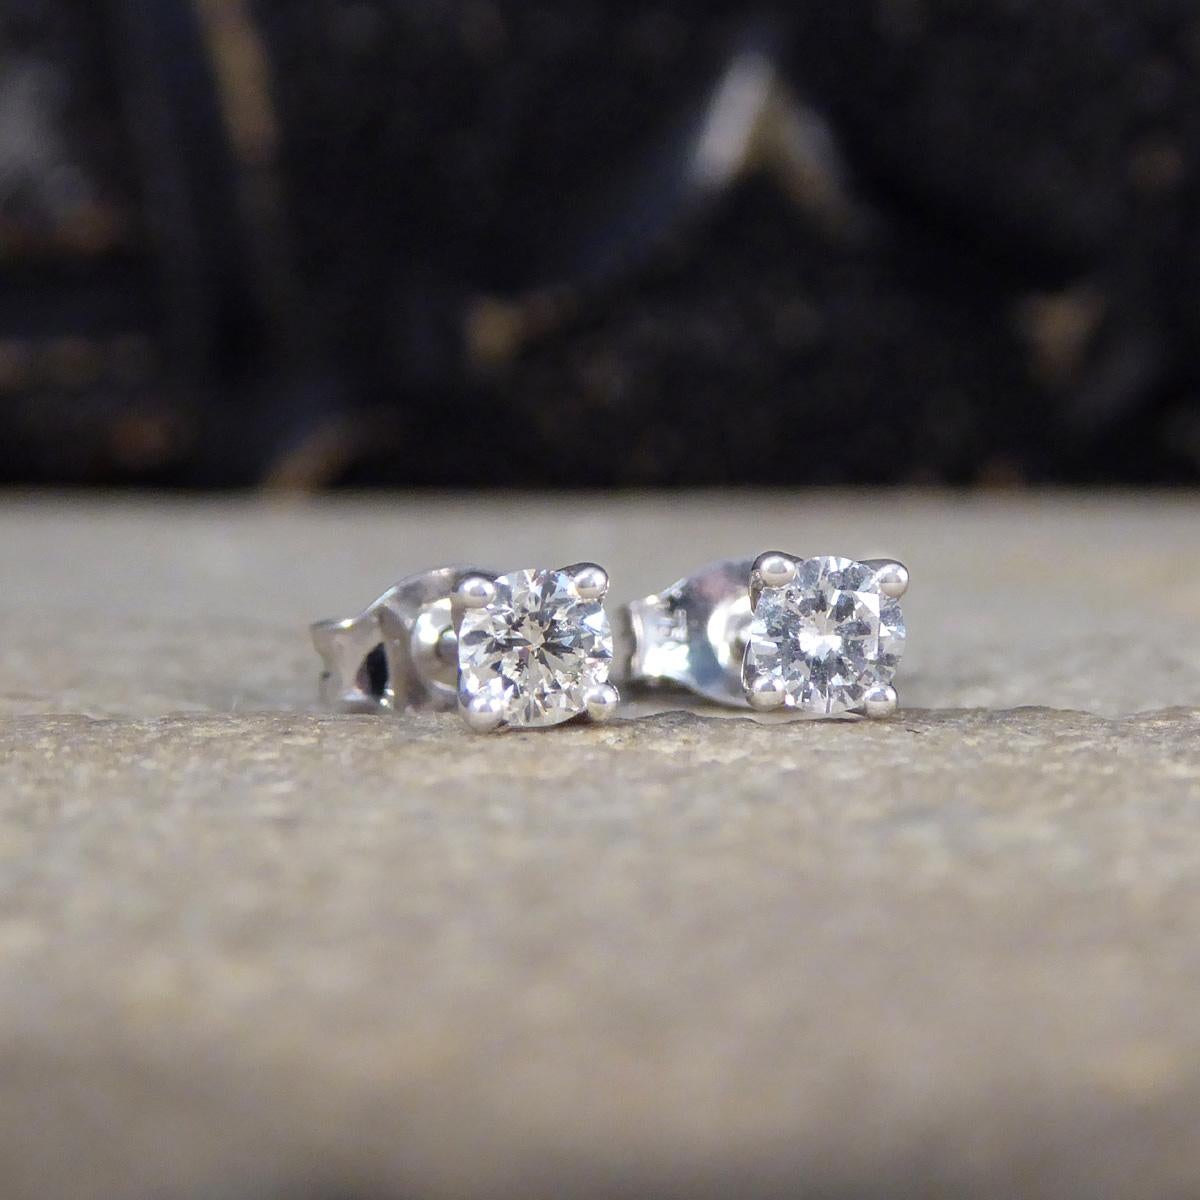 The perfect pair of stud earrings for everyday wear, for the main or second piercing. Each stud is set with a Round Brilliant Cut Diamond, matching well in clarity and weighing a total of 0.25ct with one colour grade difference but unnoticeable when